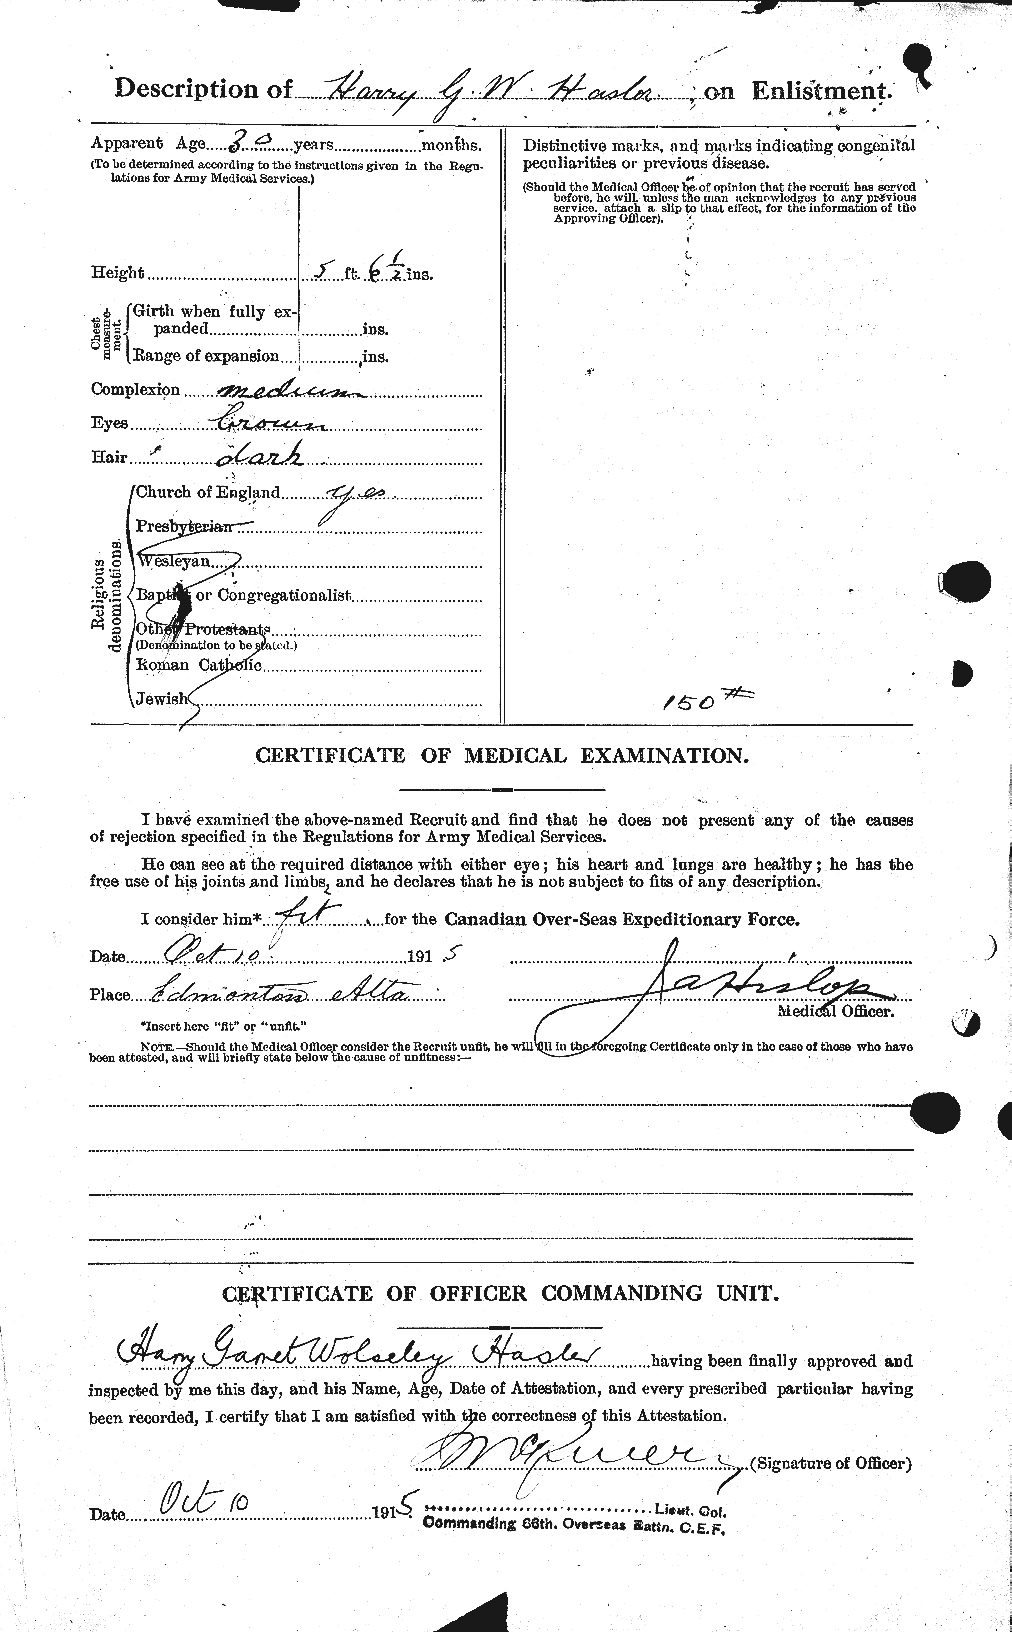 Personnel Records of the First World War - CEF 386897b